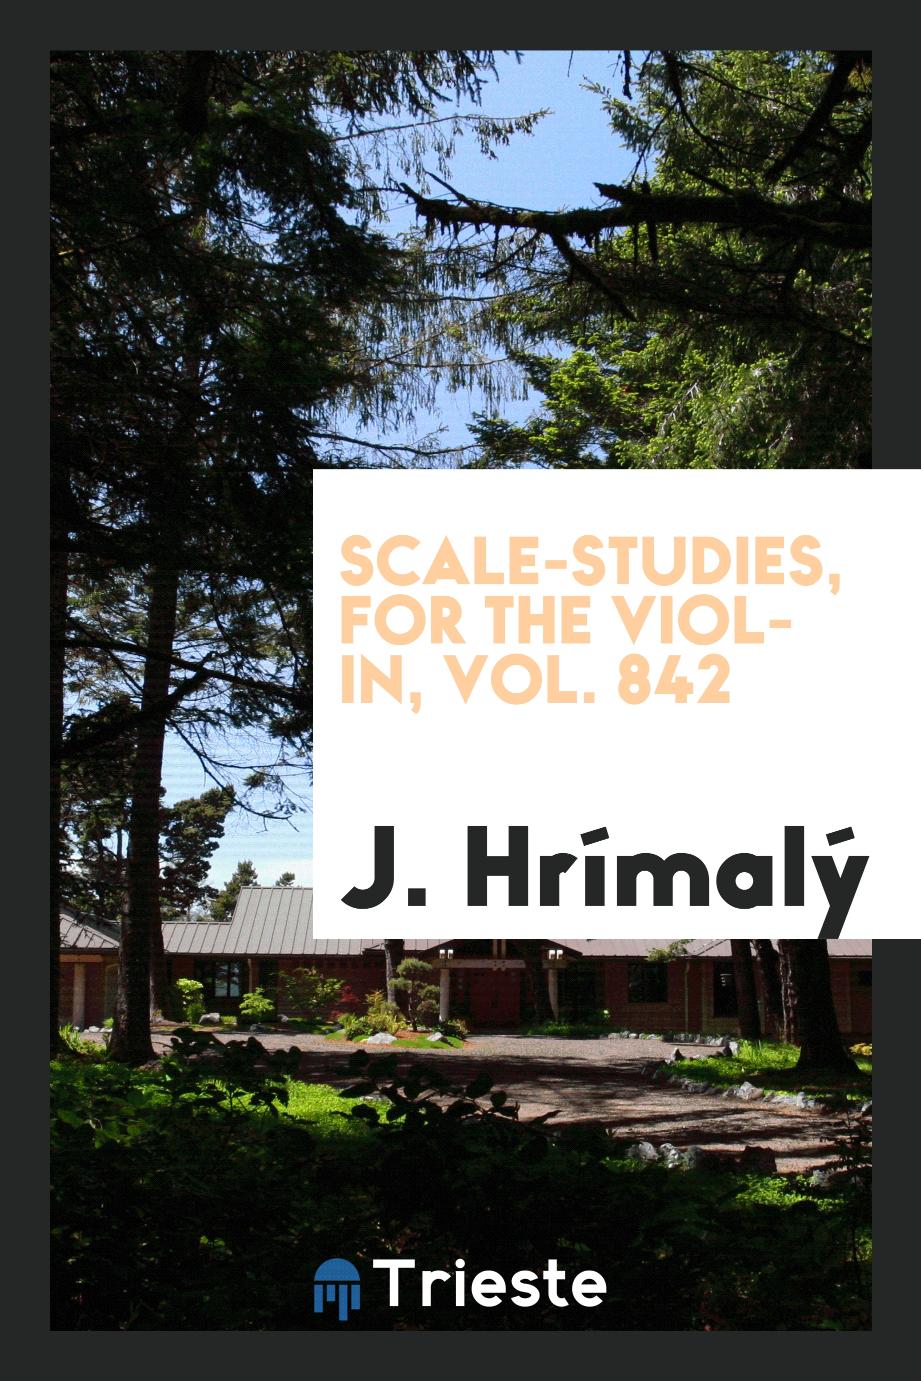 Scale-studies, for the violin, Vol. 842